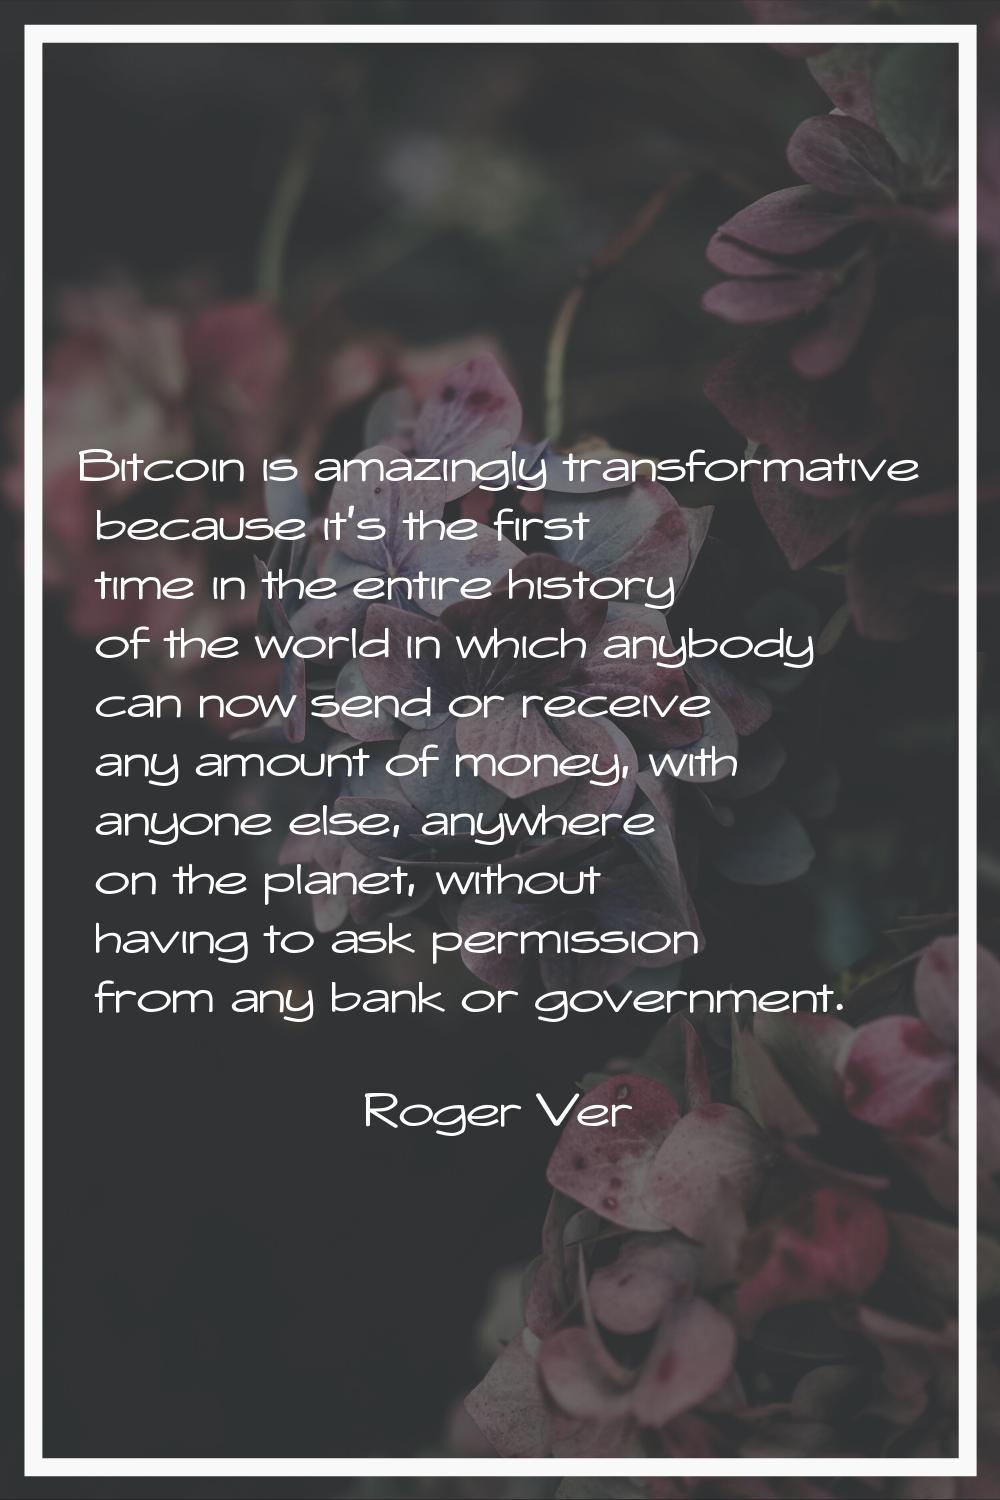 Bitcoin is amazingly transformative because it's the first time in the entire history of the world 